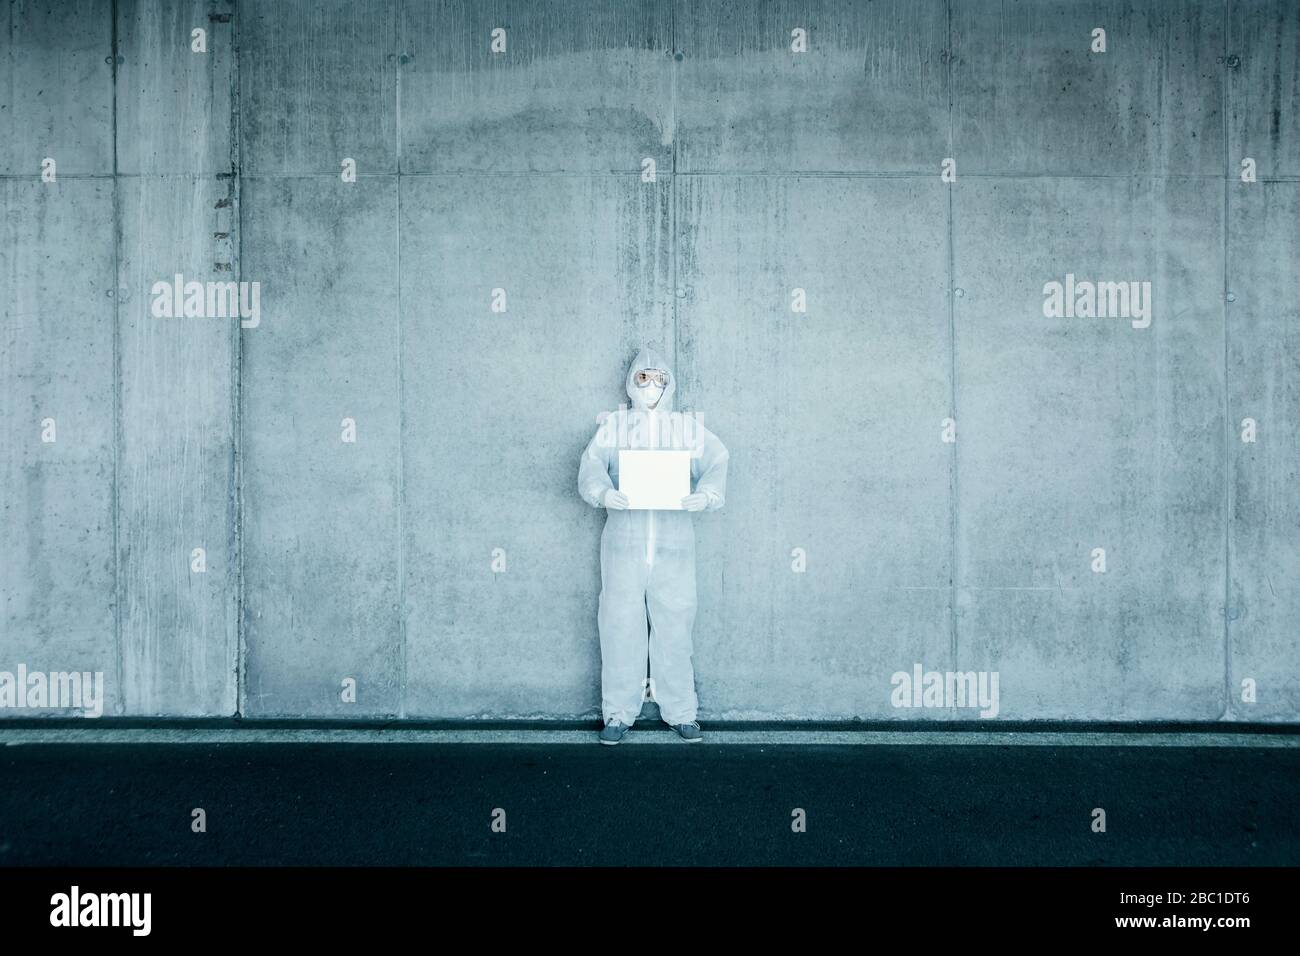 Man wearing protective clothing holding a blank sign Stock Photo